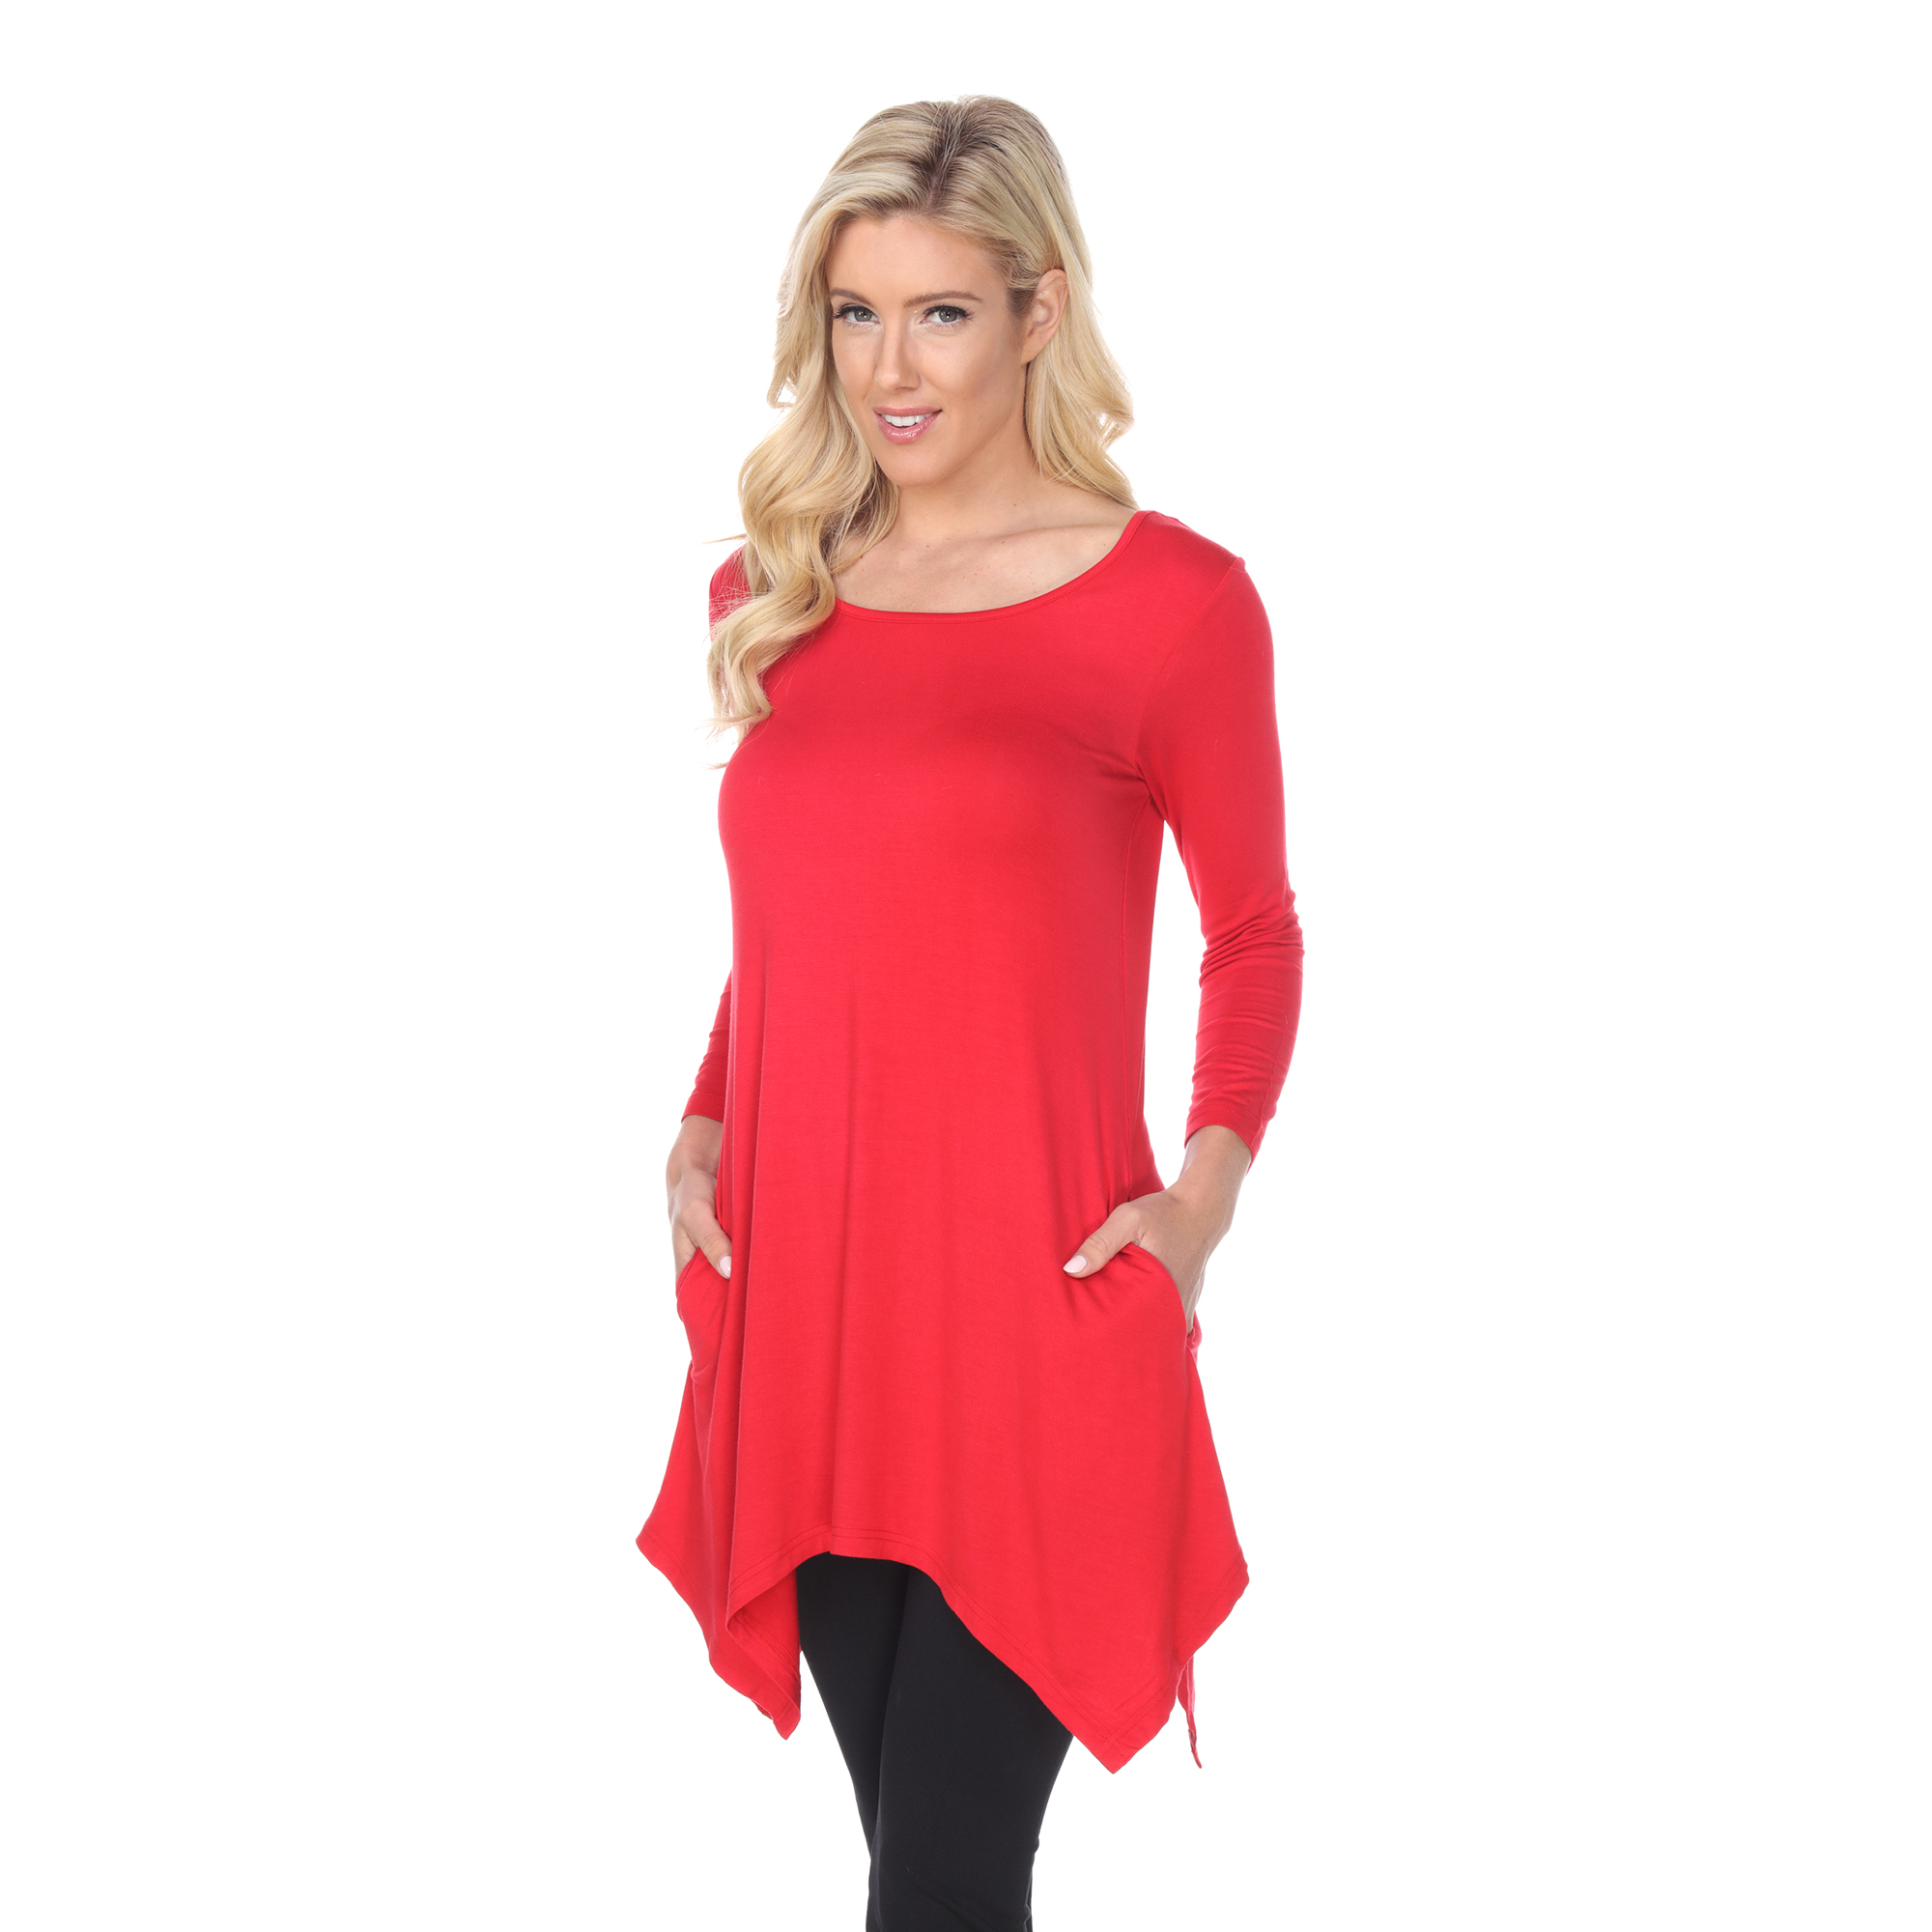 White Mark Women's Quarter Sleeve Tunic Top With Pockets - Red, 2X